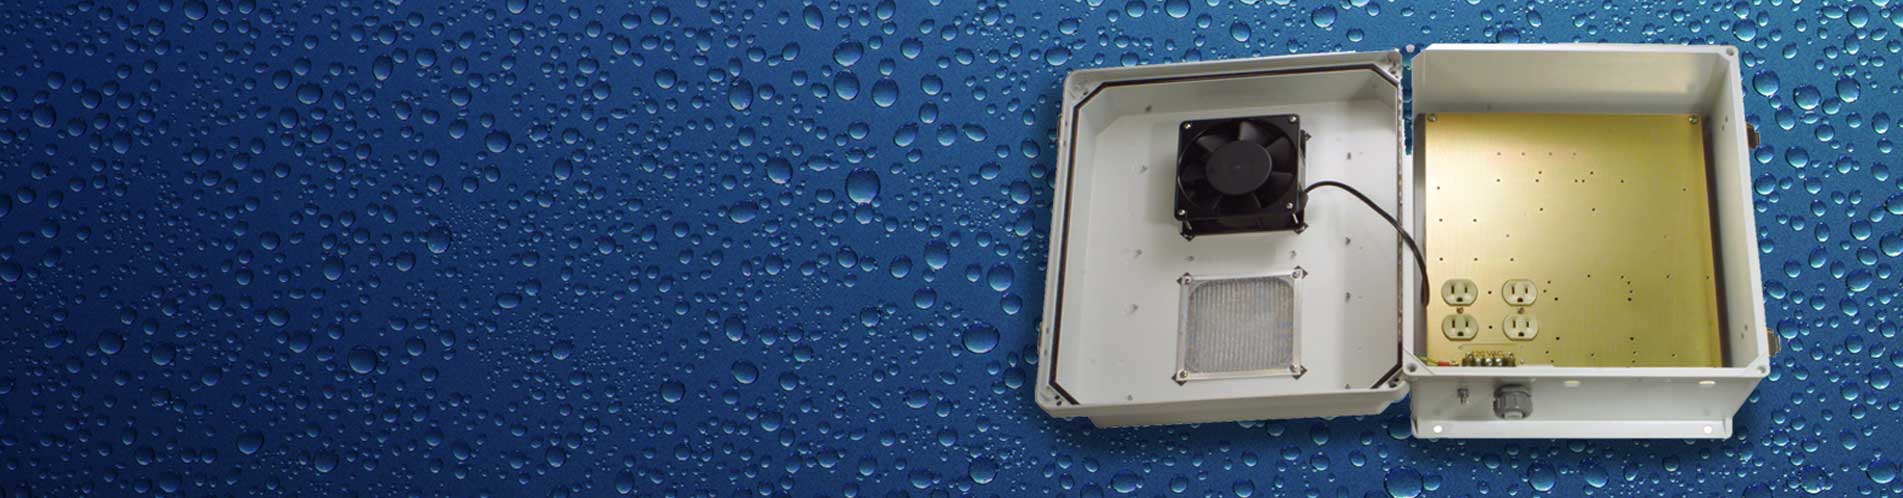 Choose from thousands of Weatherproof NEMA & Electrical Enclosures options